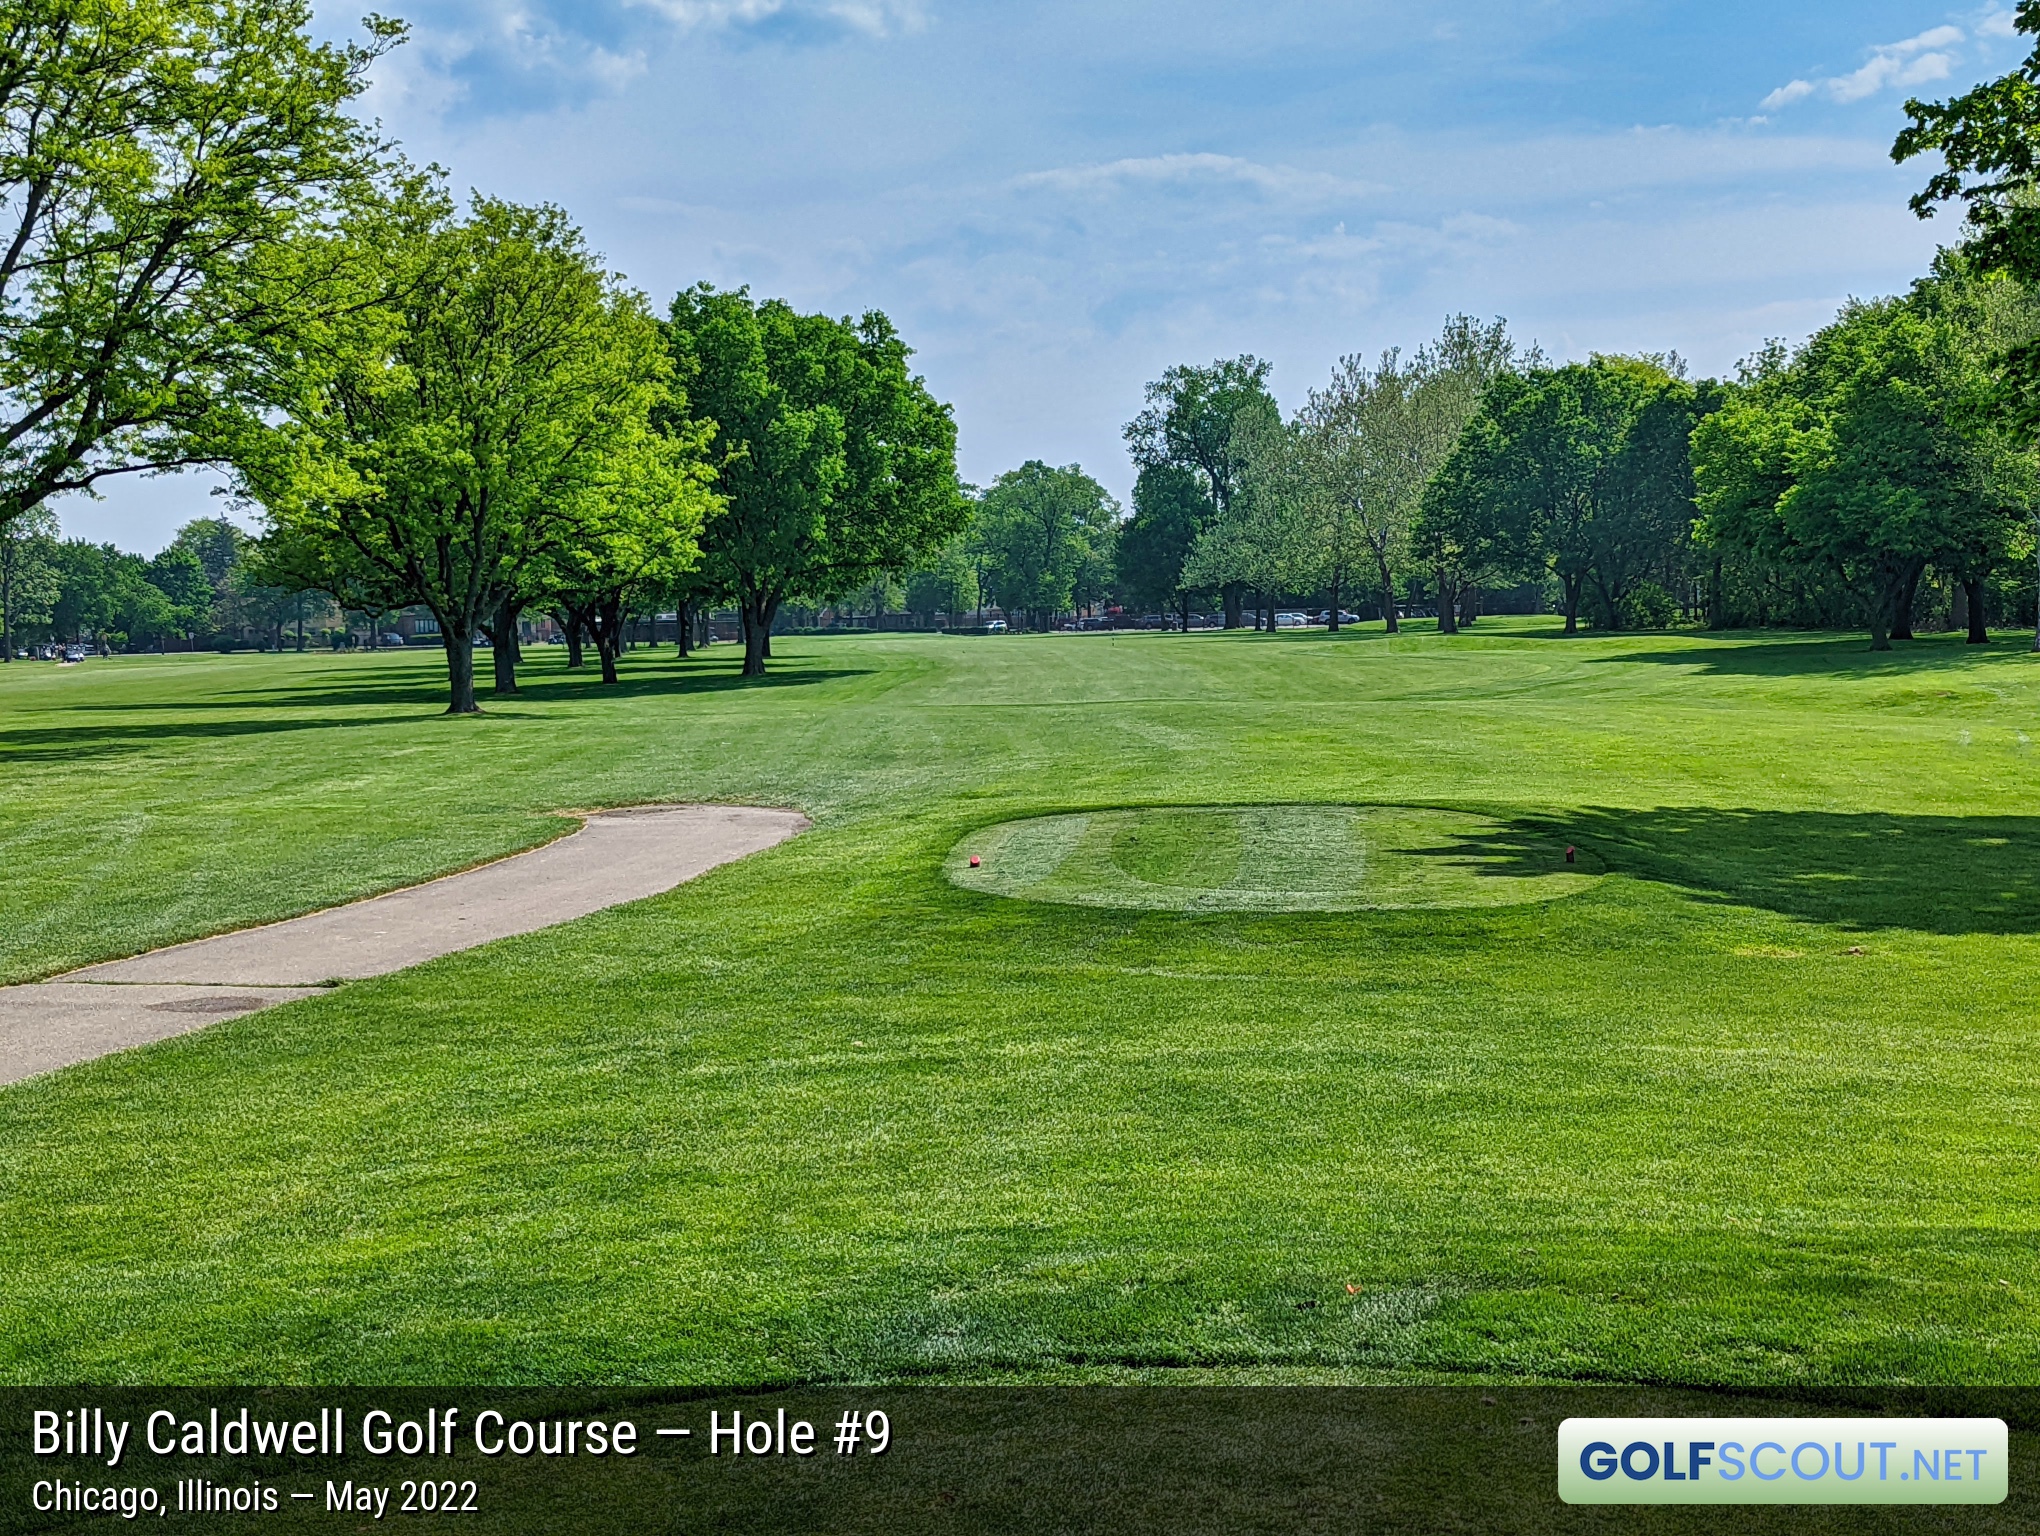 Photo of hole #9 at Billy Caldwell Golf Course in Chicago, Illinois. 